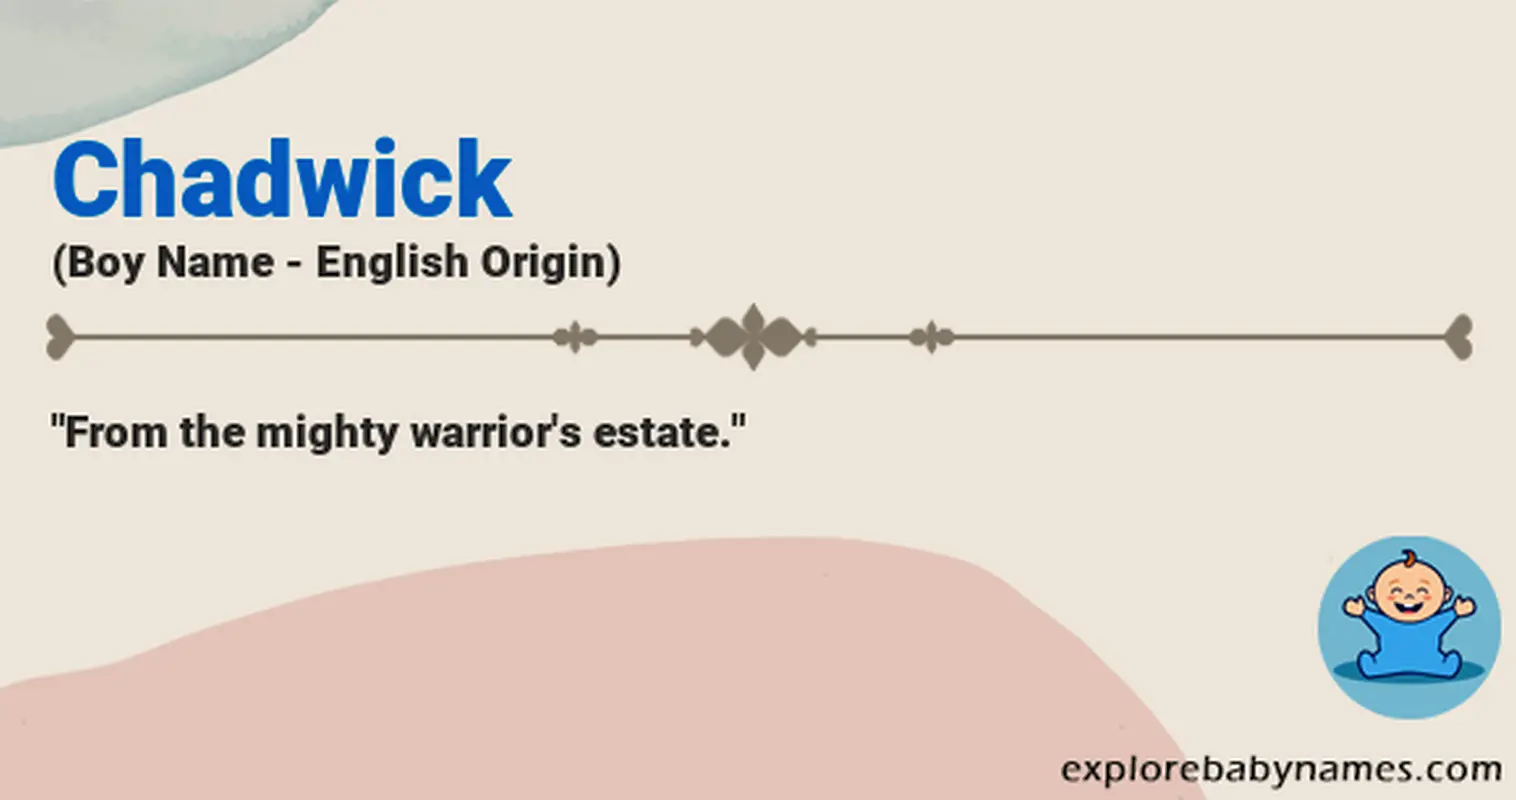 Meaning of Chadwick